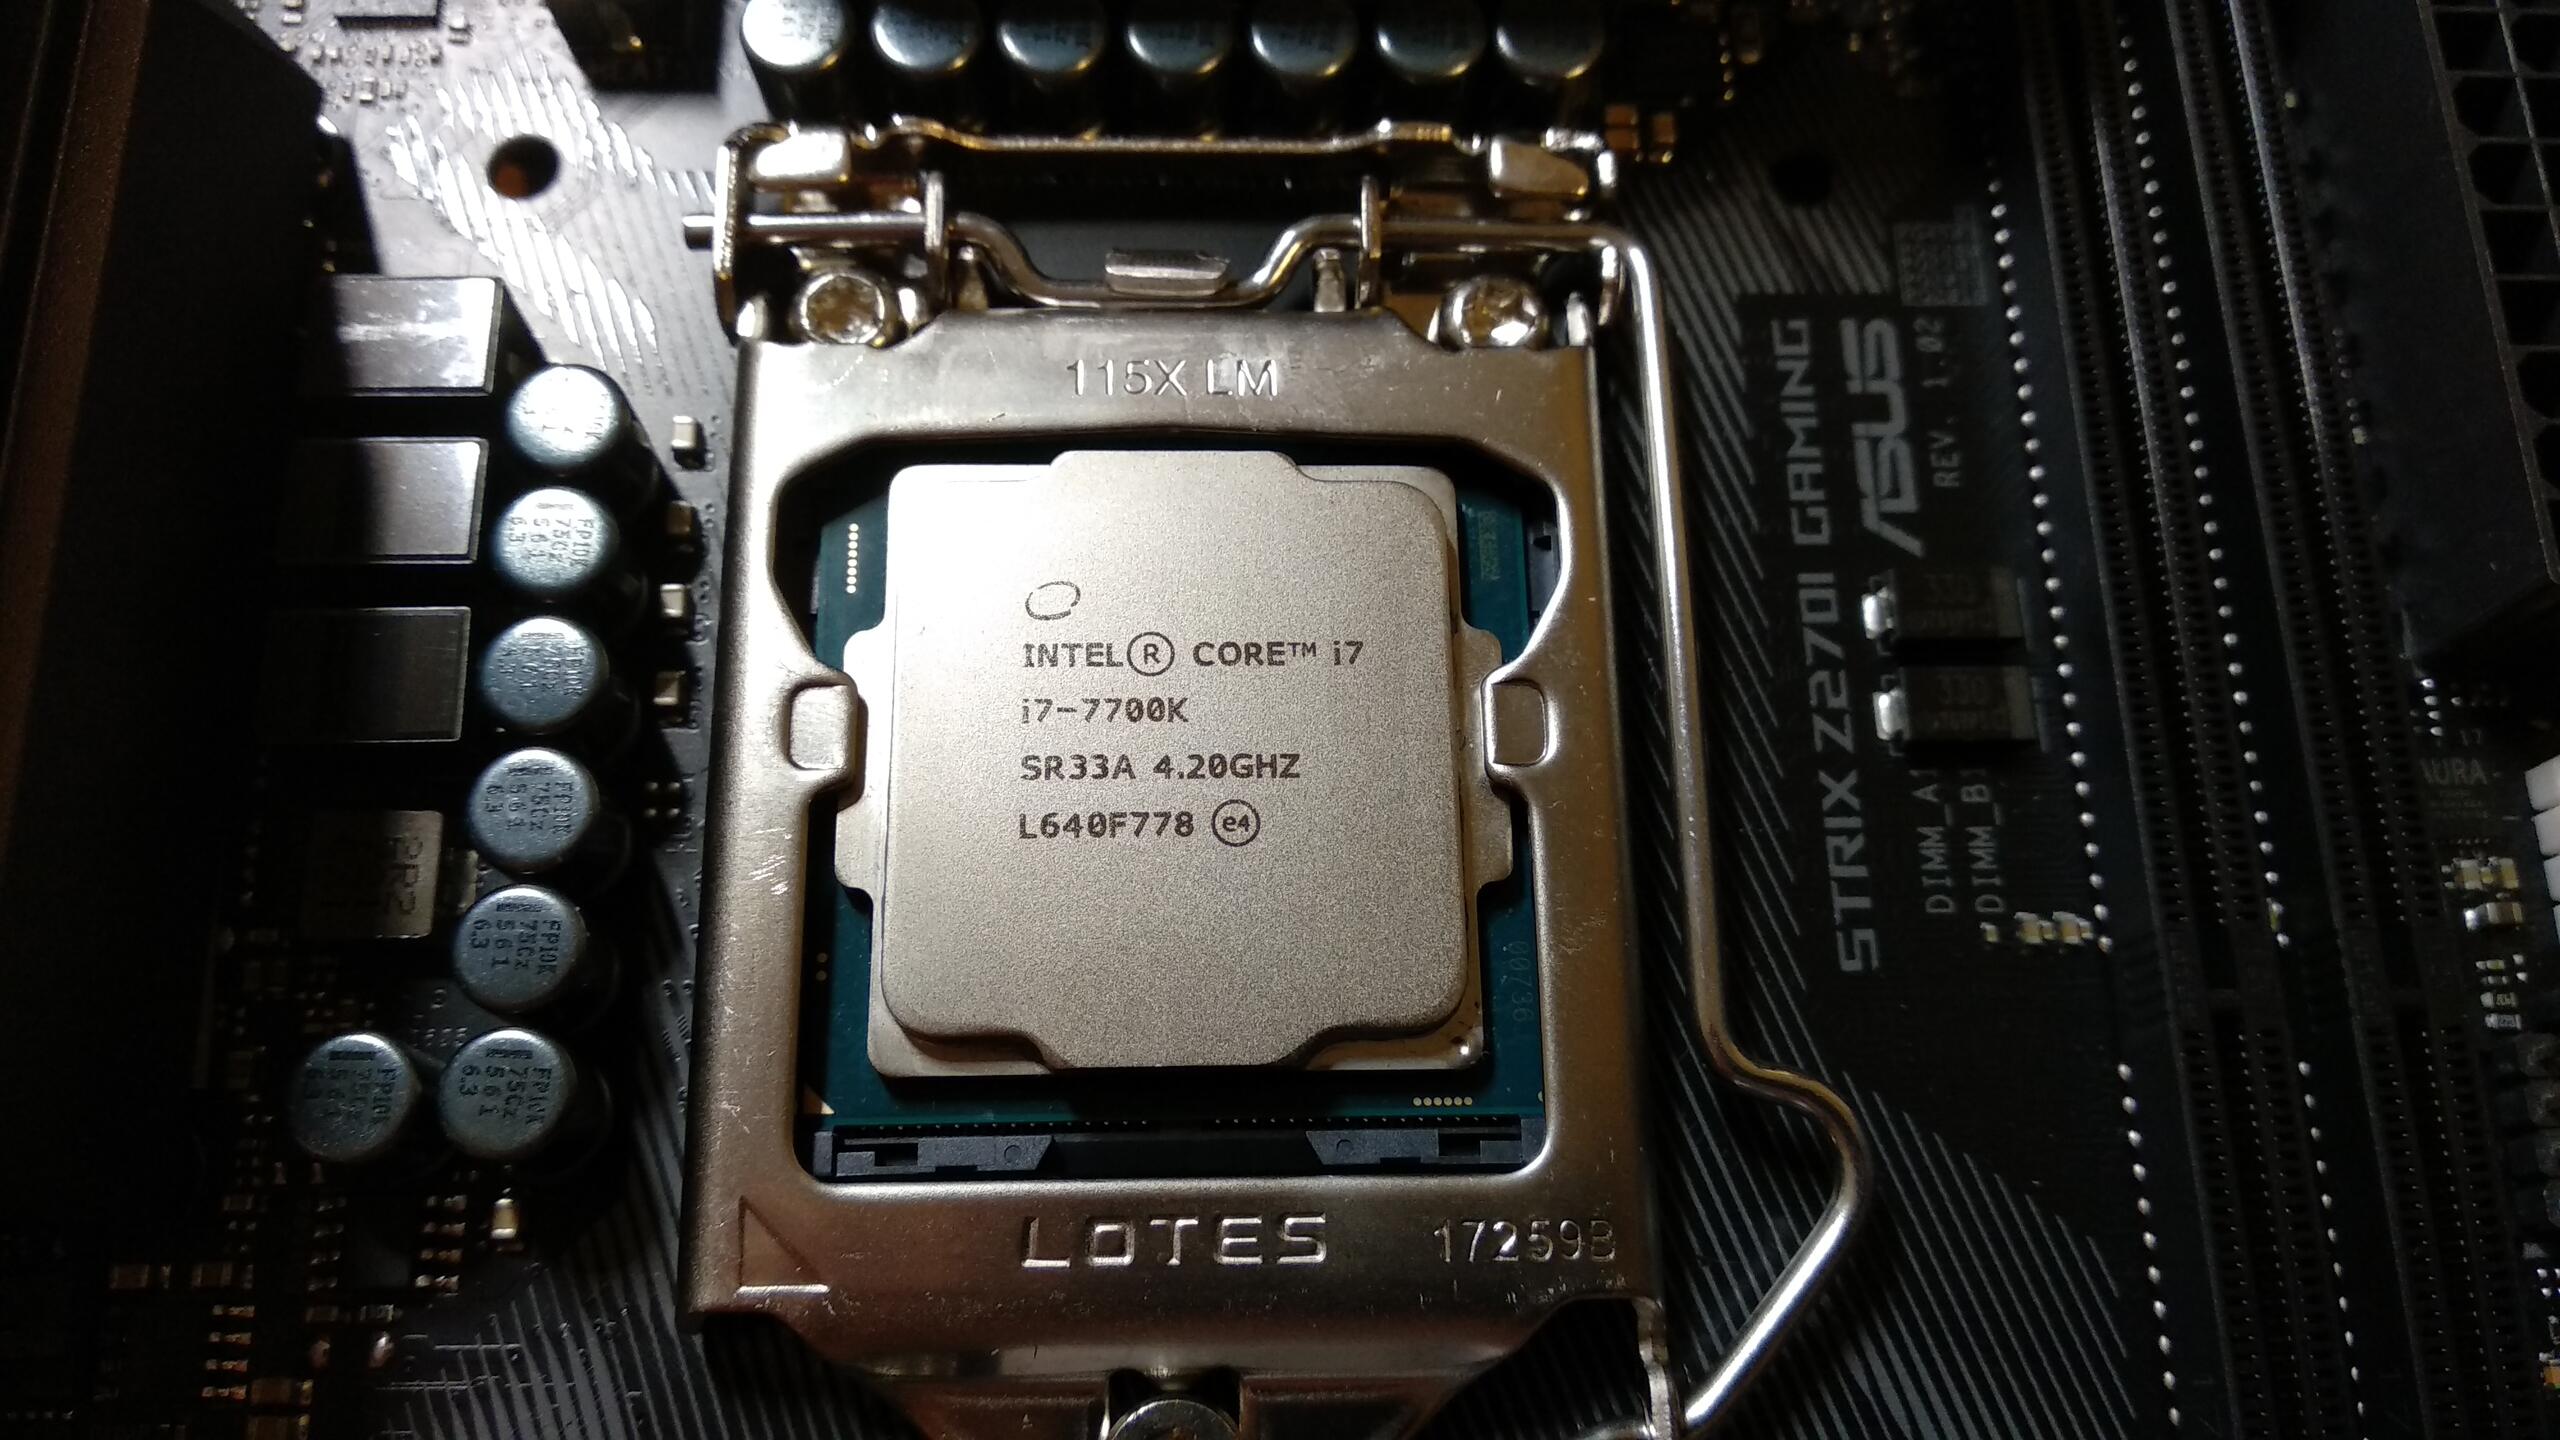 The CPU fitted in its socket, waiting for its thermal paste.